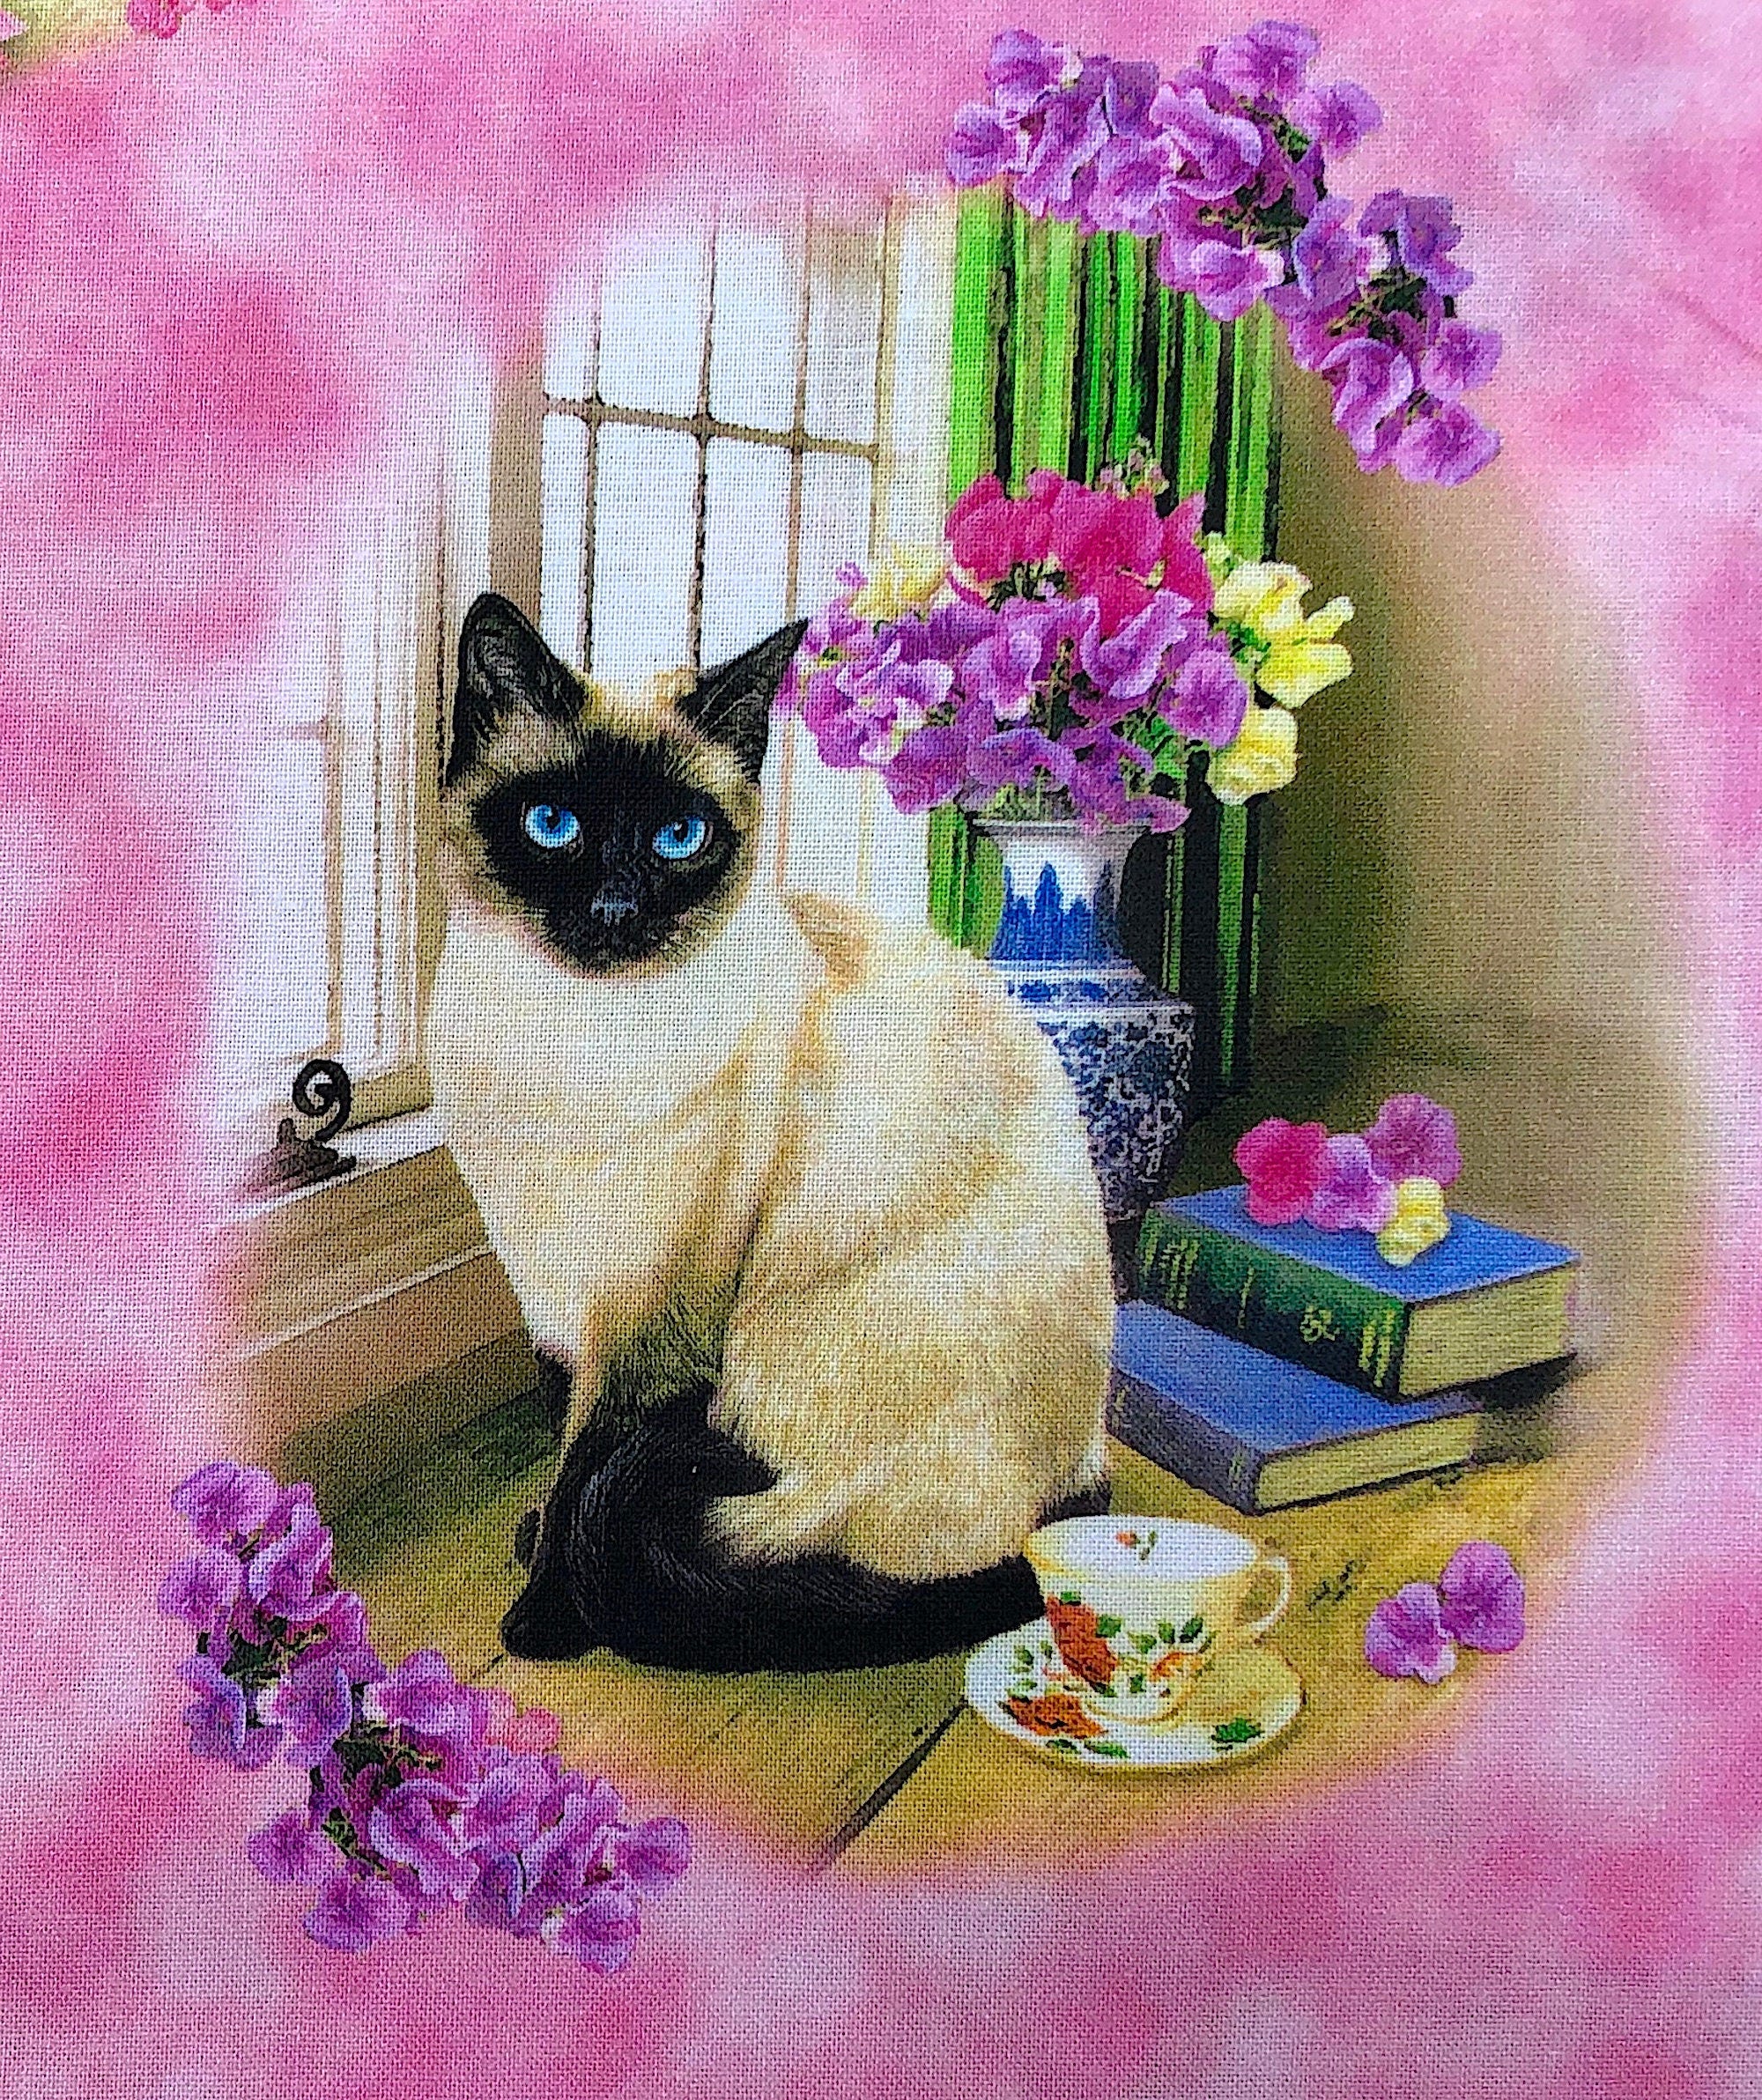 Close up of a Siamese cat sitting in front of f window by a vase of flowers.